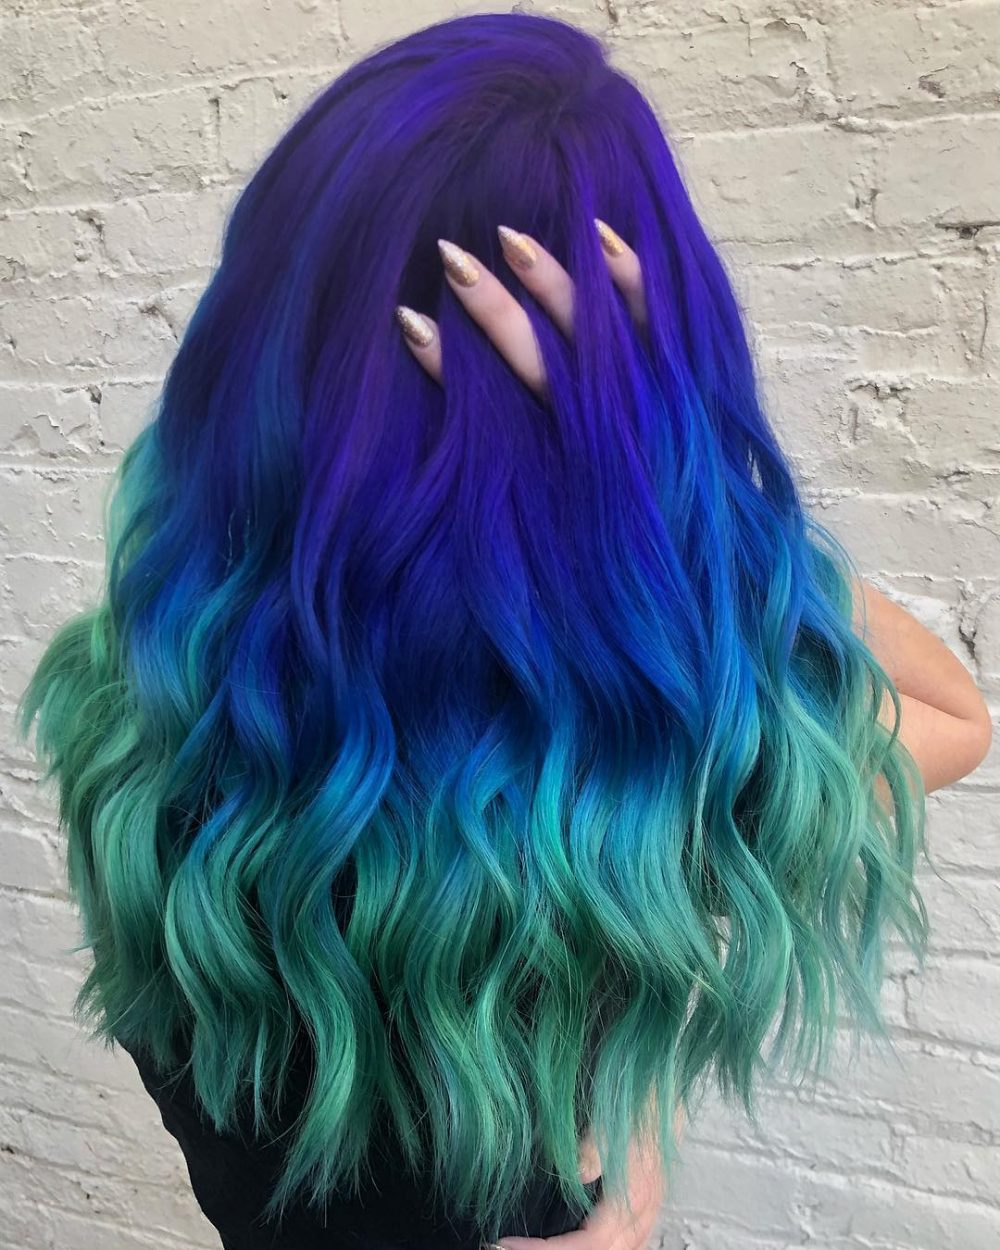 23 Incredible Examples of Blue and Purple Hair Colors.